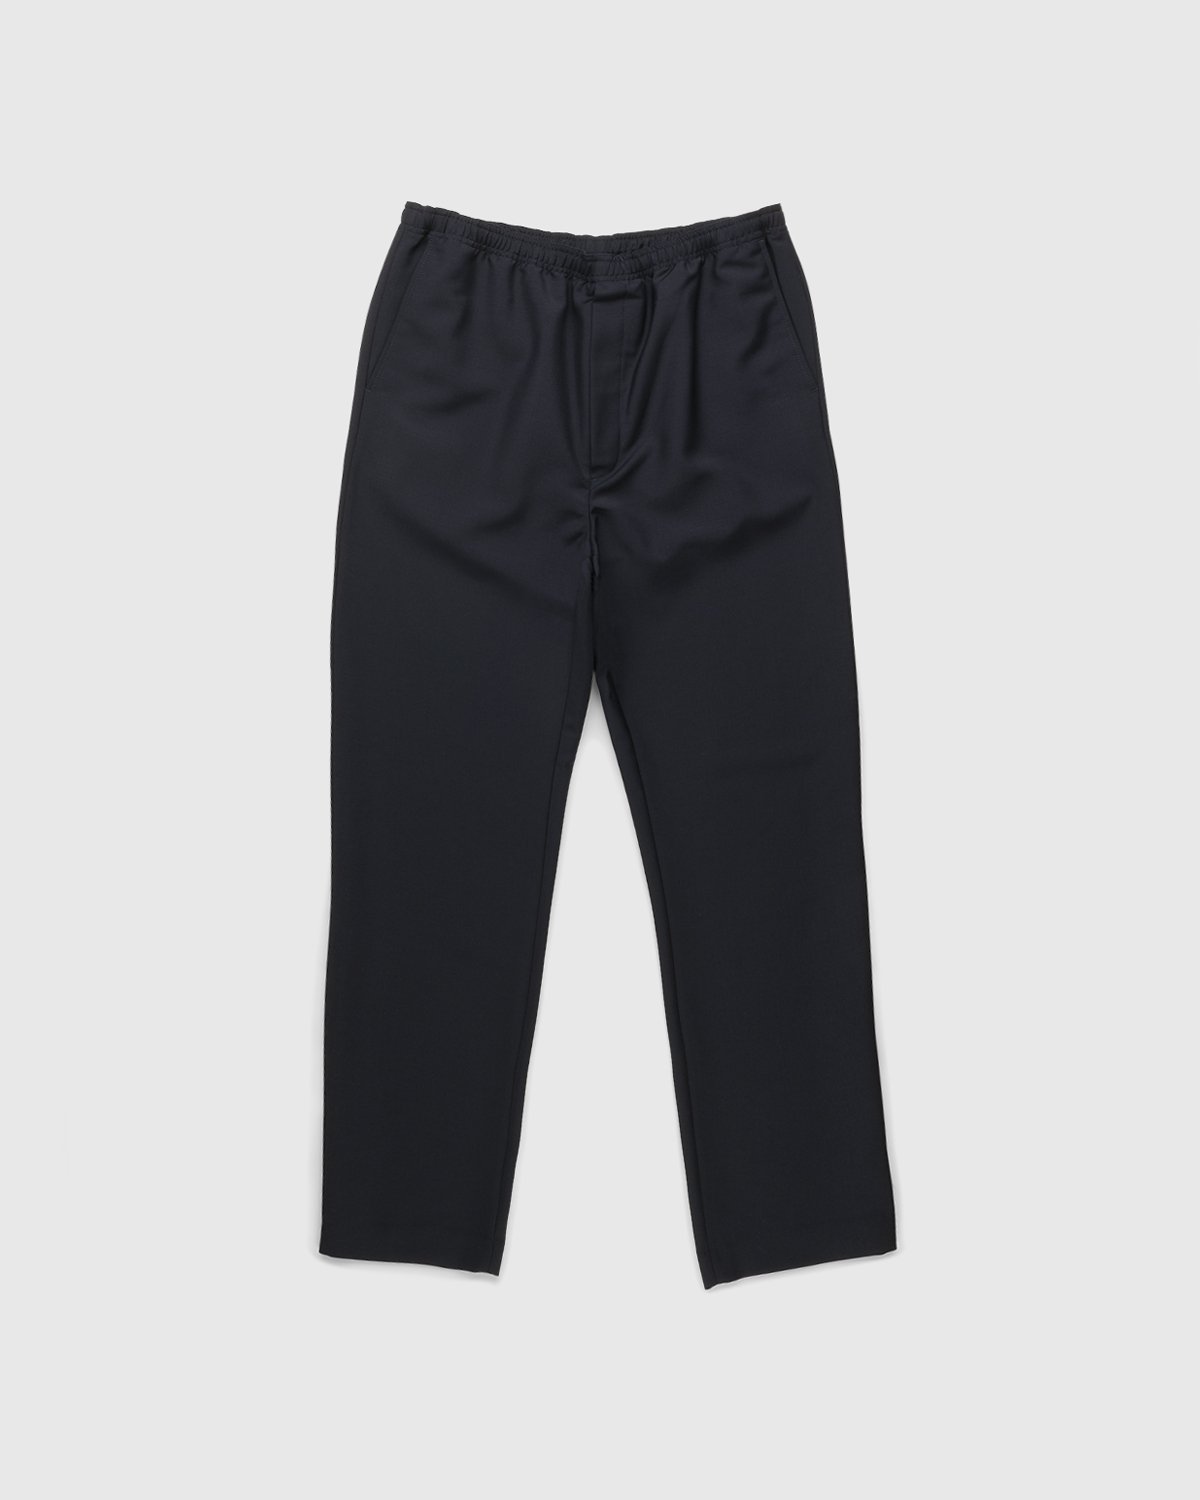 Acne Studios - Mohair Blend Drawstring Trousers Navy - Clothing - Blue - Image 1